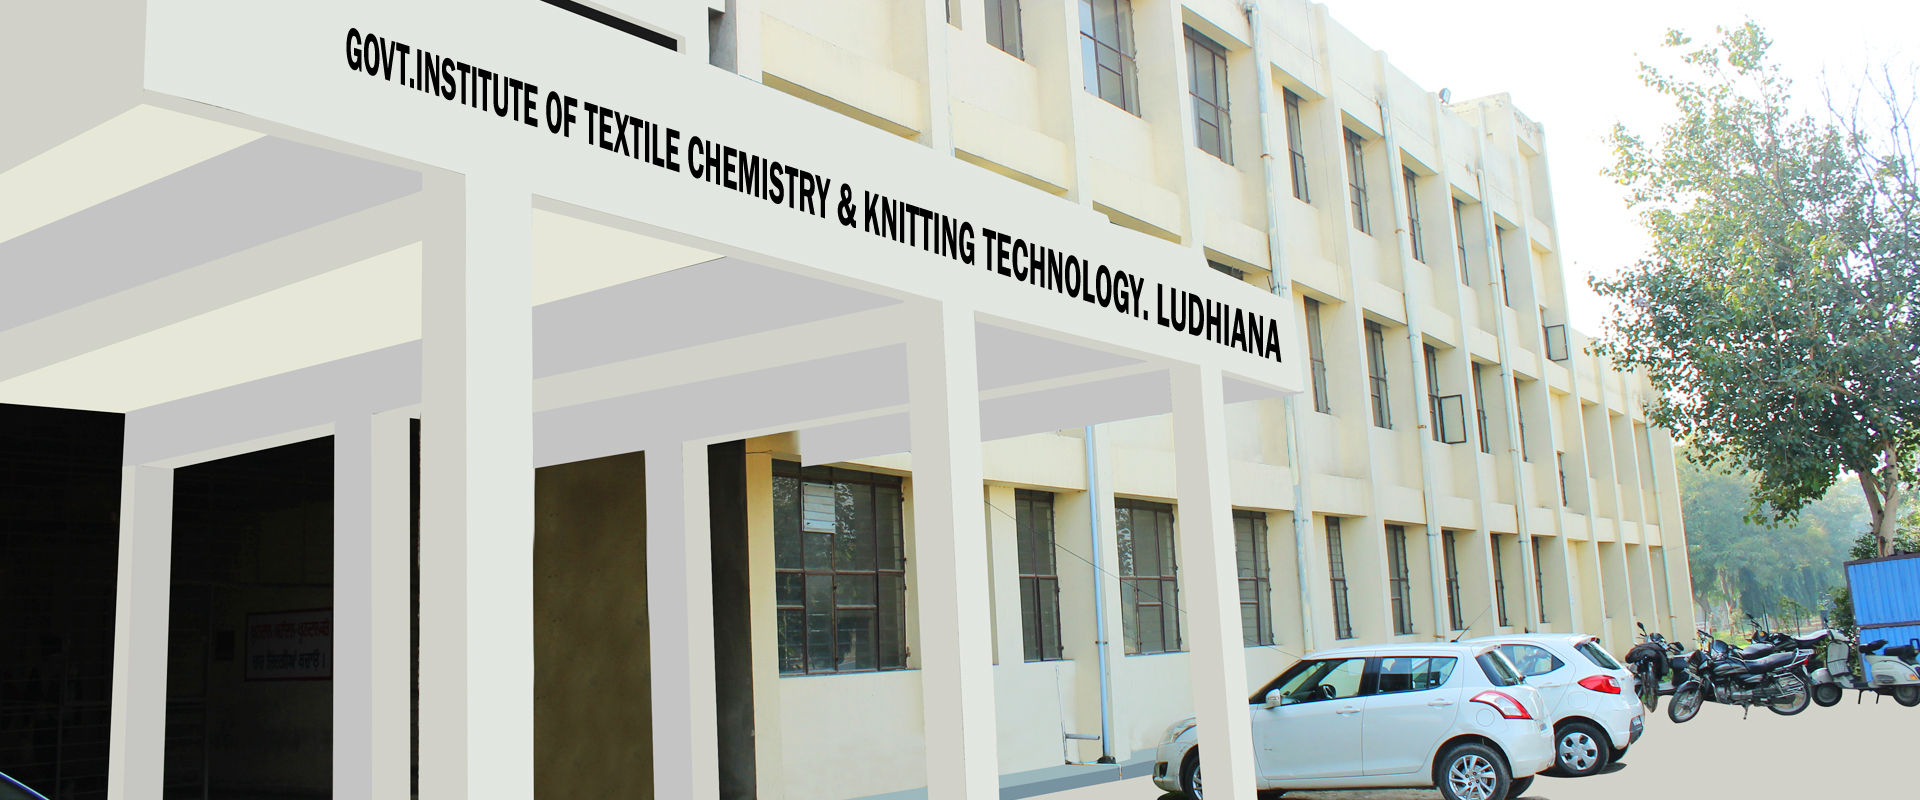 Government Institute of Textile Chemistry and Knitting Technology